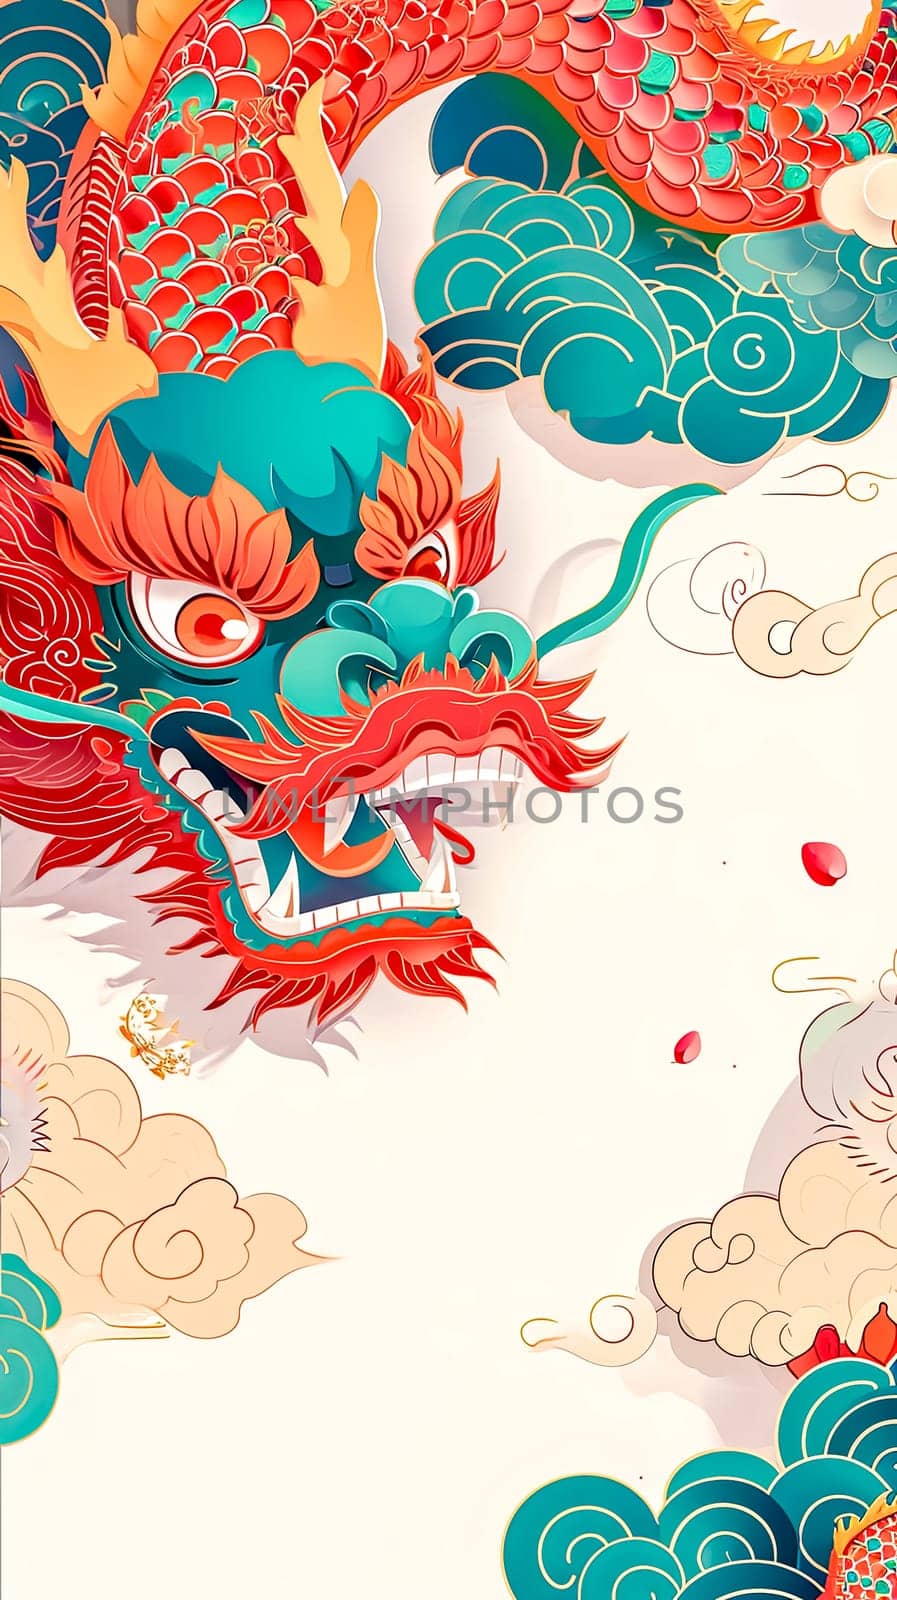 traditional Chinese dragon in motion, with stylized clouds and swirling motifs, perfect for festive or cultural themes by Edophoto